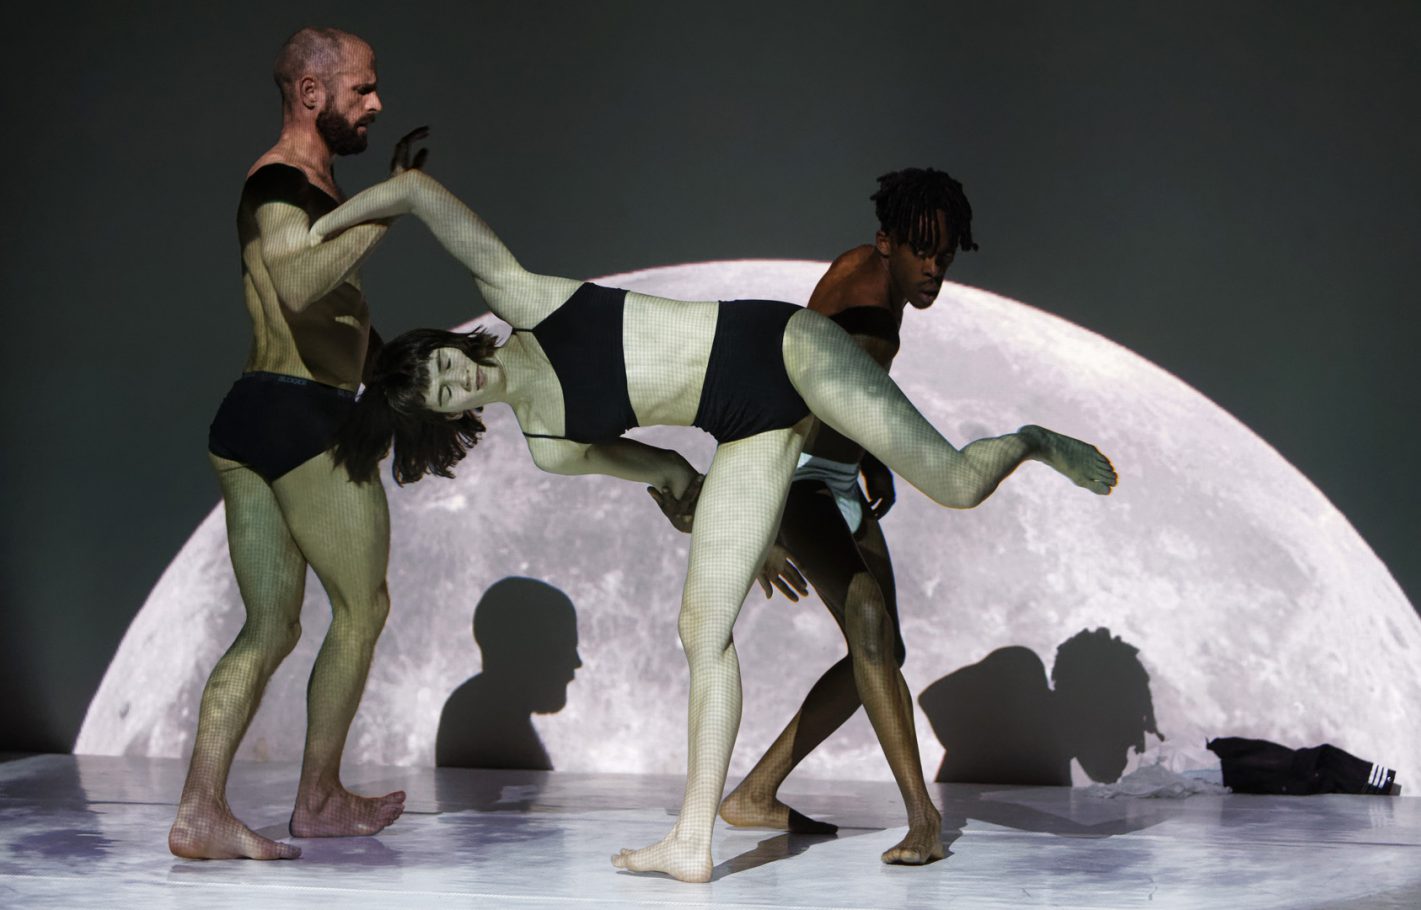 moving-future-dansmakers-amsterdam-transitioning-performance-connor-schumacher-christopher-tandy-orla-mccarthy-nicolas-coutsier-dans-theater-fotografie-thomas-lenden